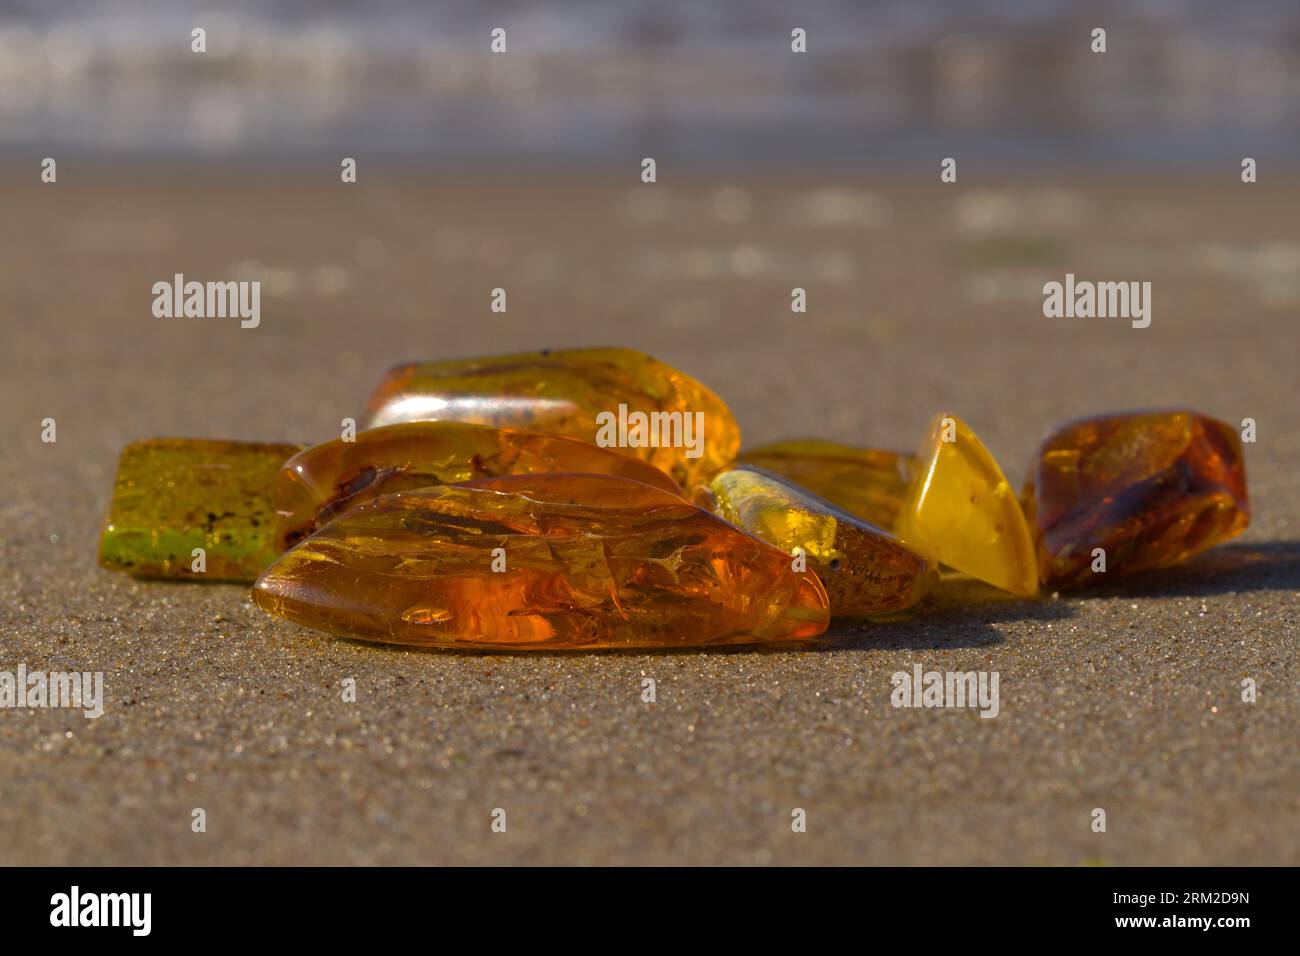 A few natural, polished Baltic ambers on a sandy beach in the rays of the setting sun. Kolobrzeg, Poland. Stock Photo